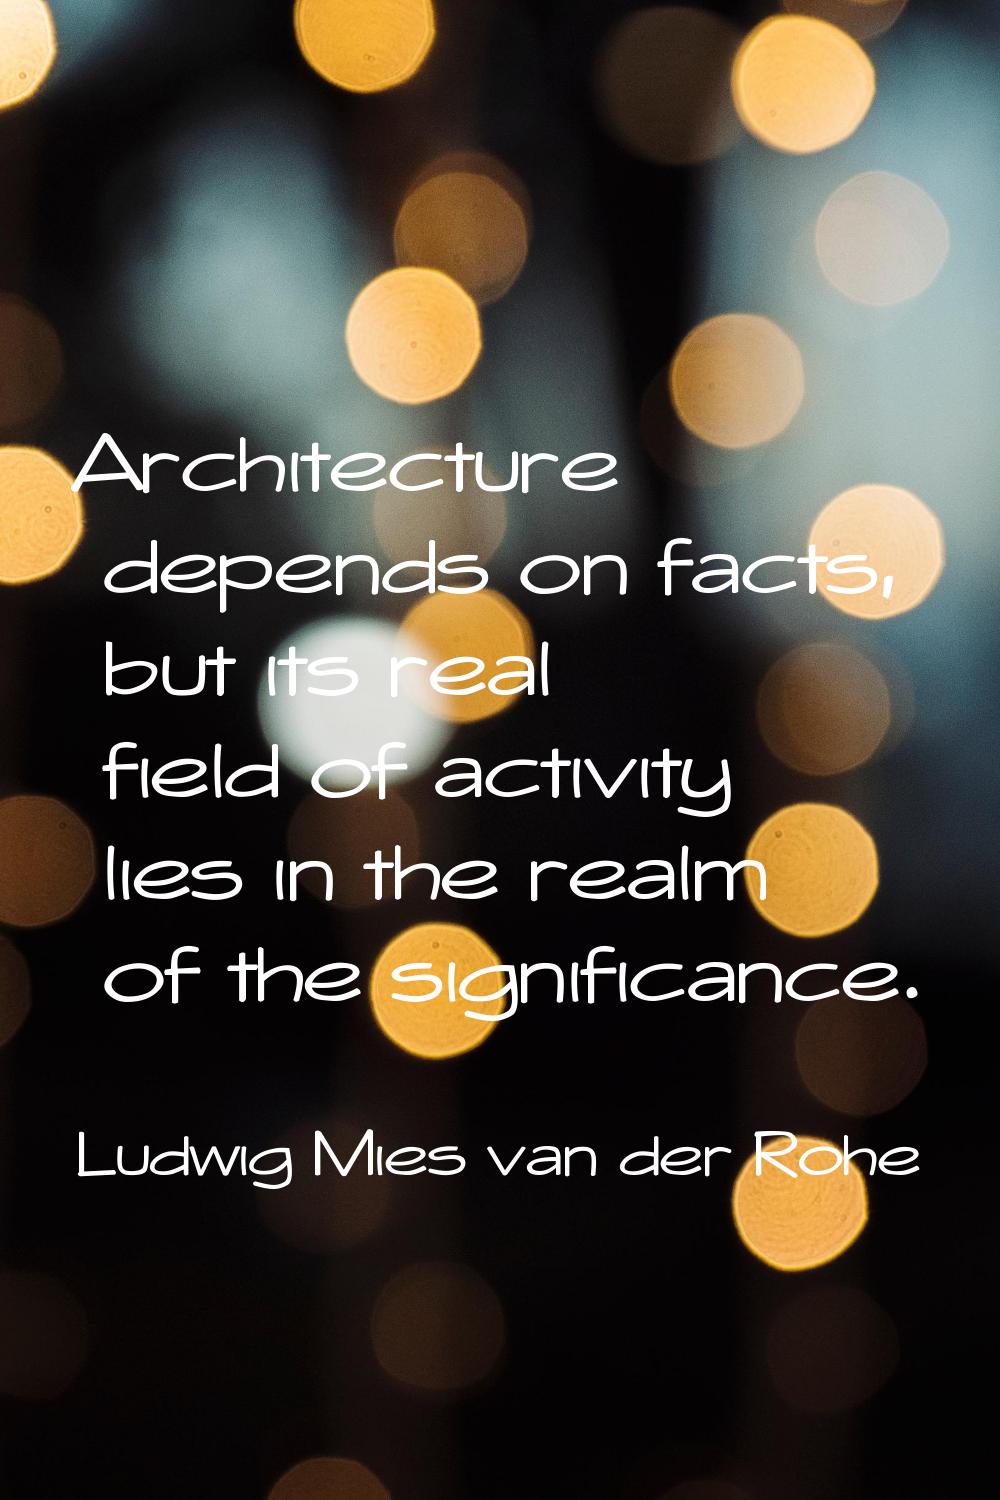 Architecture depends on facts, but its real field of activity lies in the realm of the significance